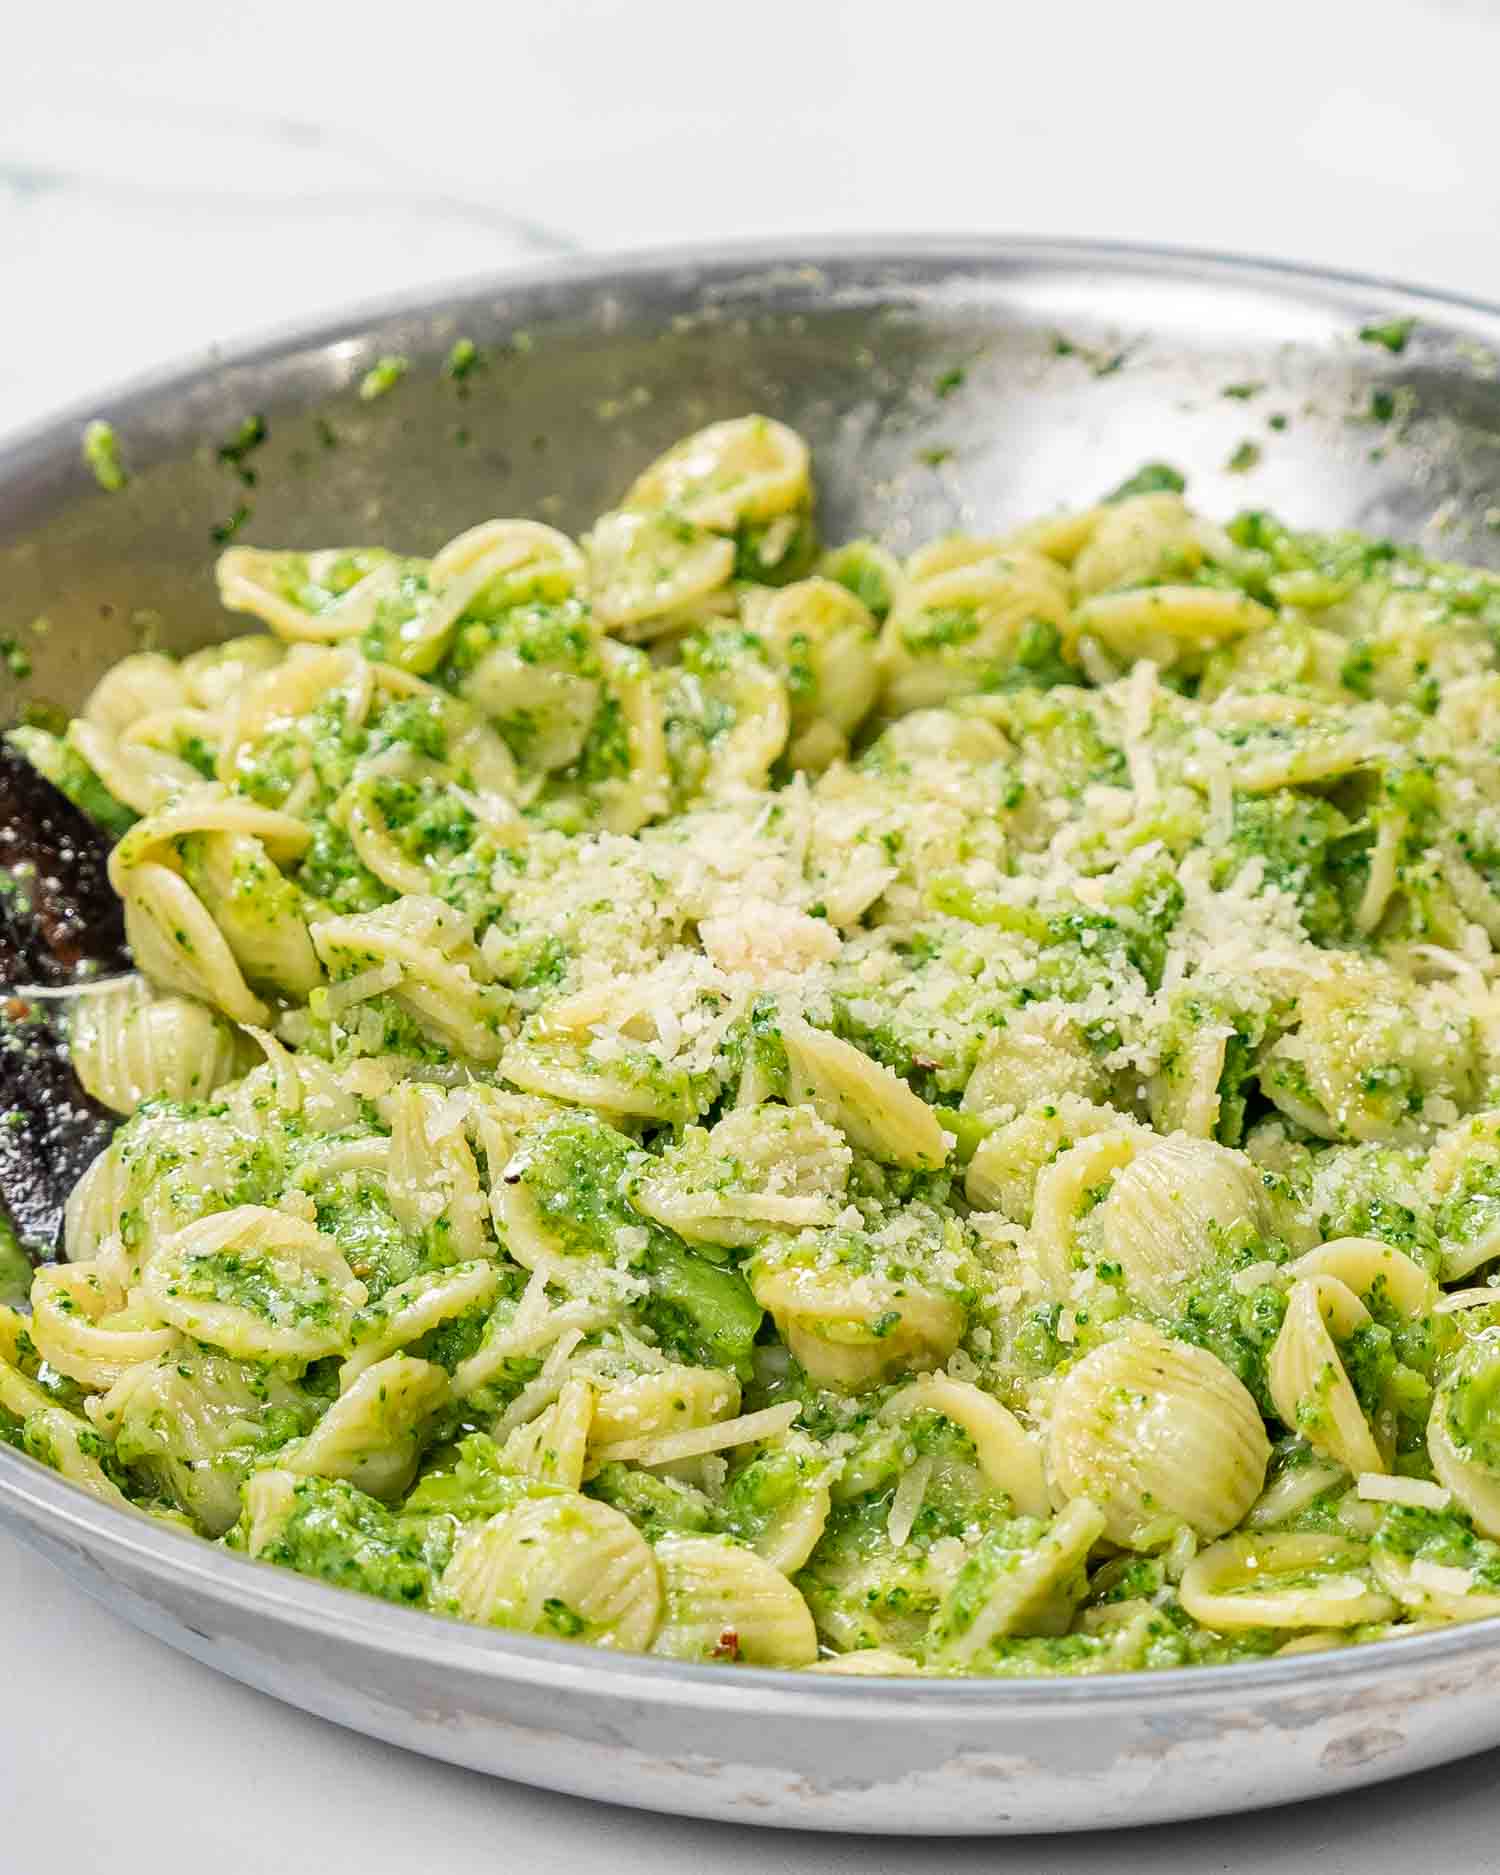 freshly made broccoli pasta with parmesan cheese in a skillet.